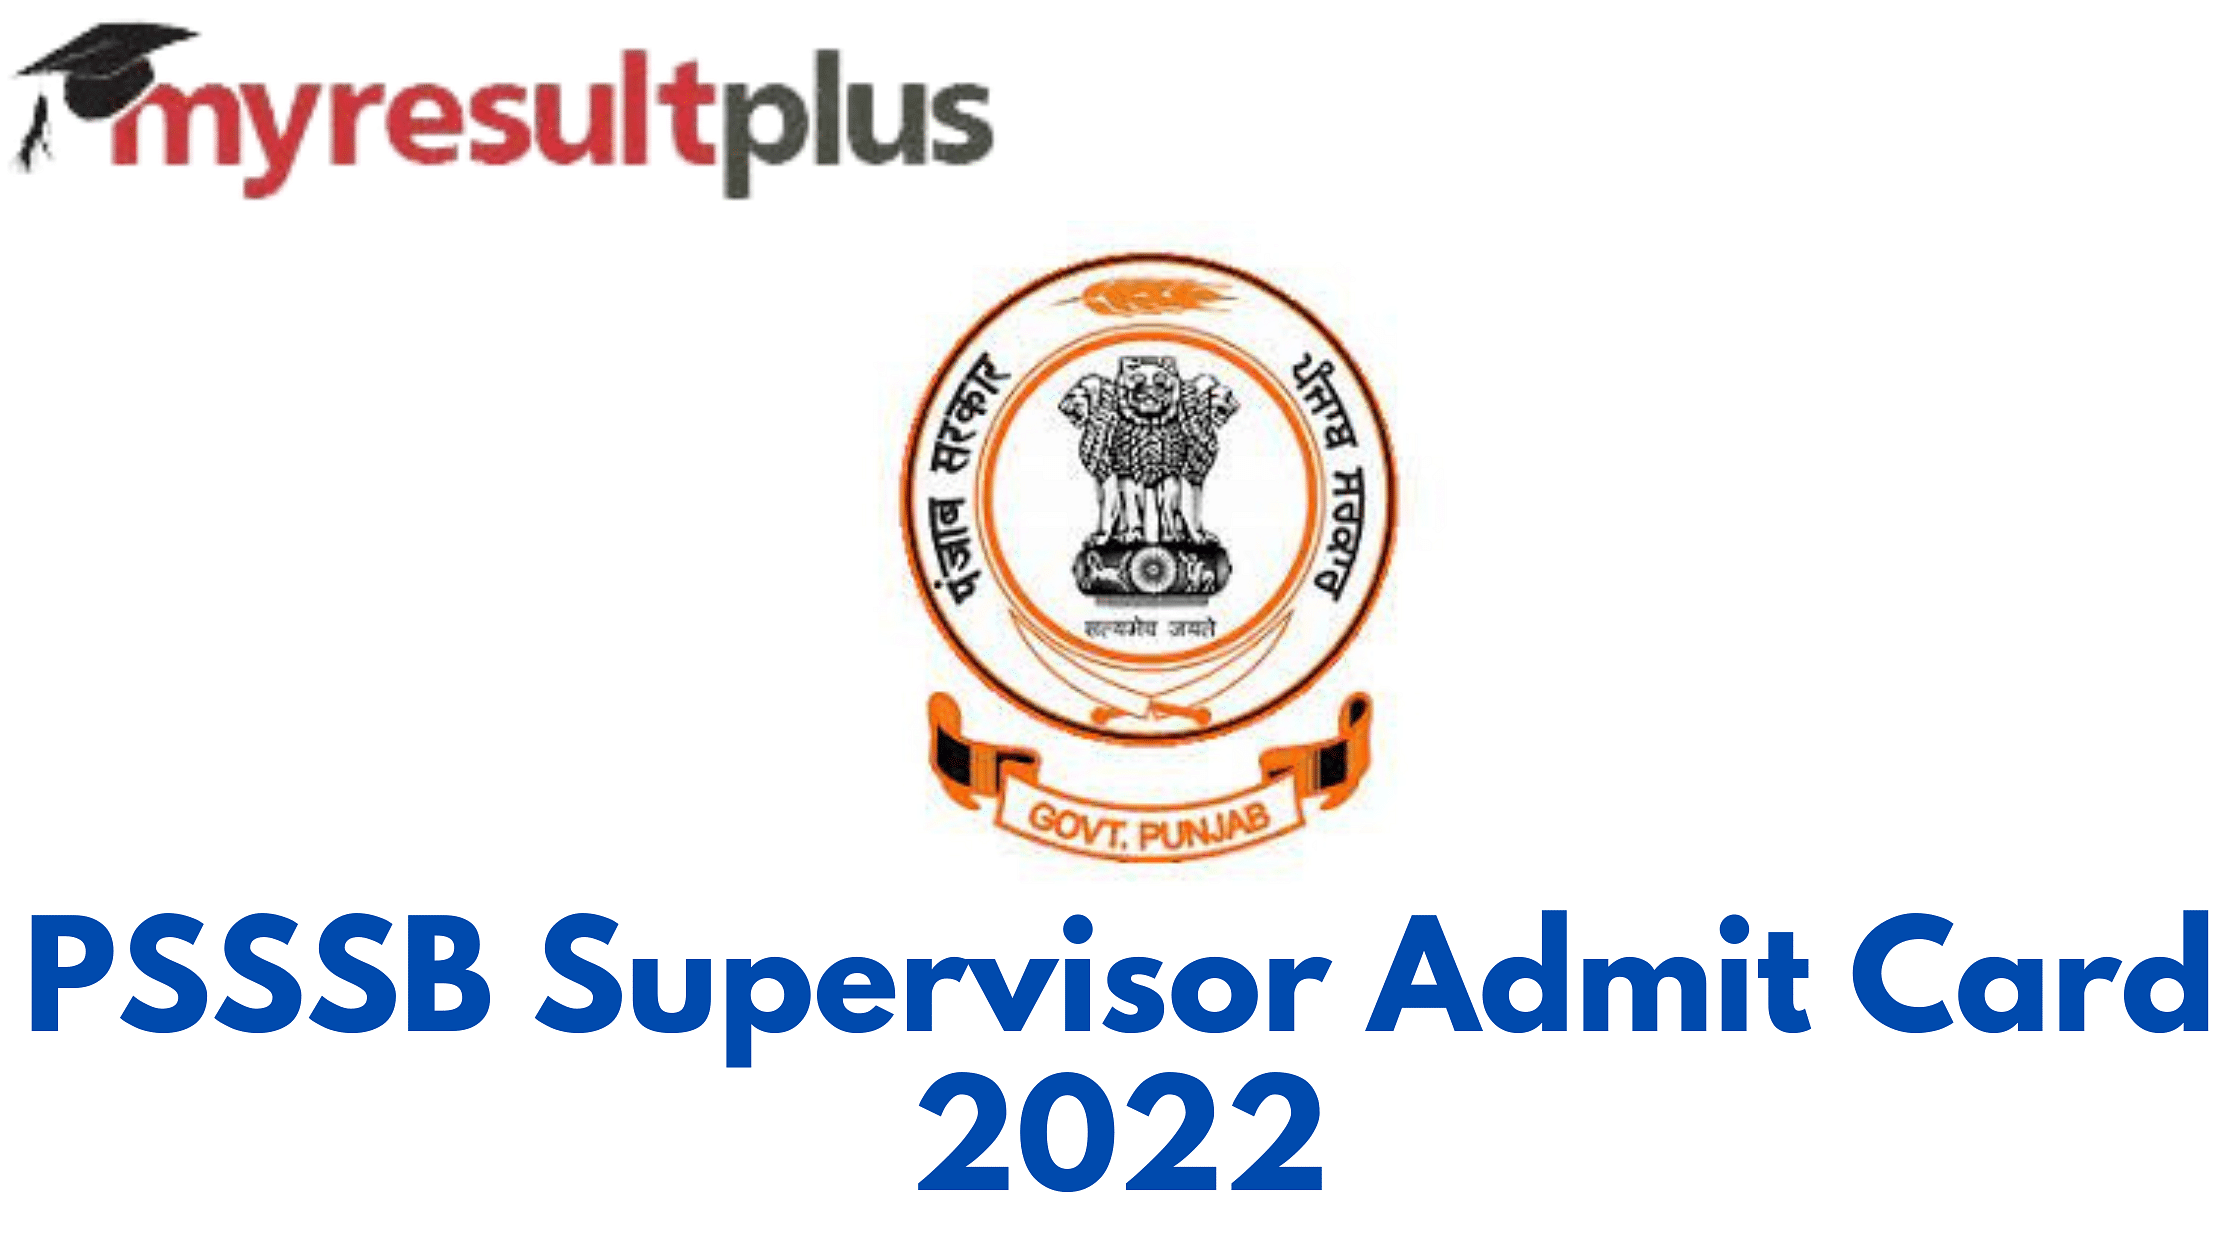 PSSSB Supervisor Admit Card 2022 Released, Here's How to Download